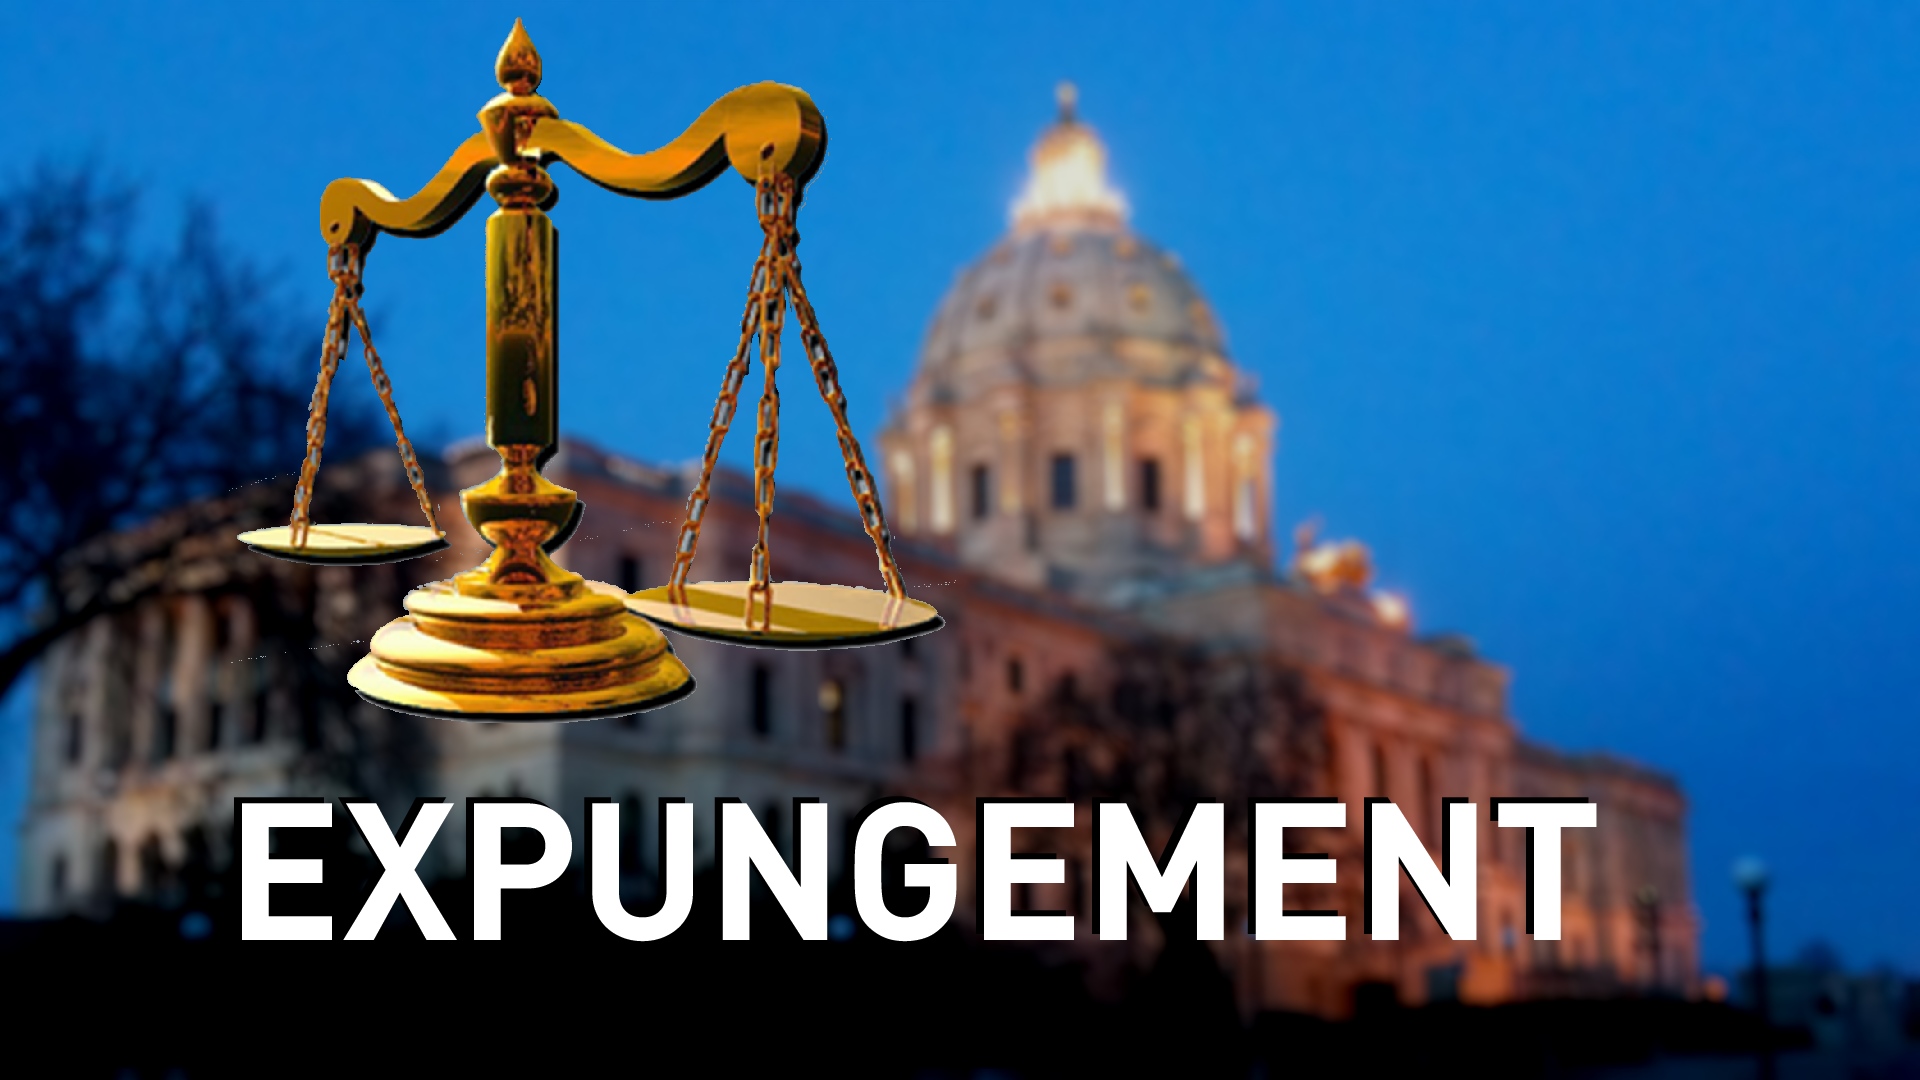 New expungement law takes effect in 2015